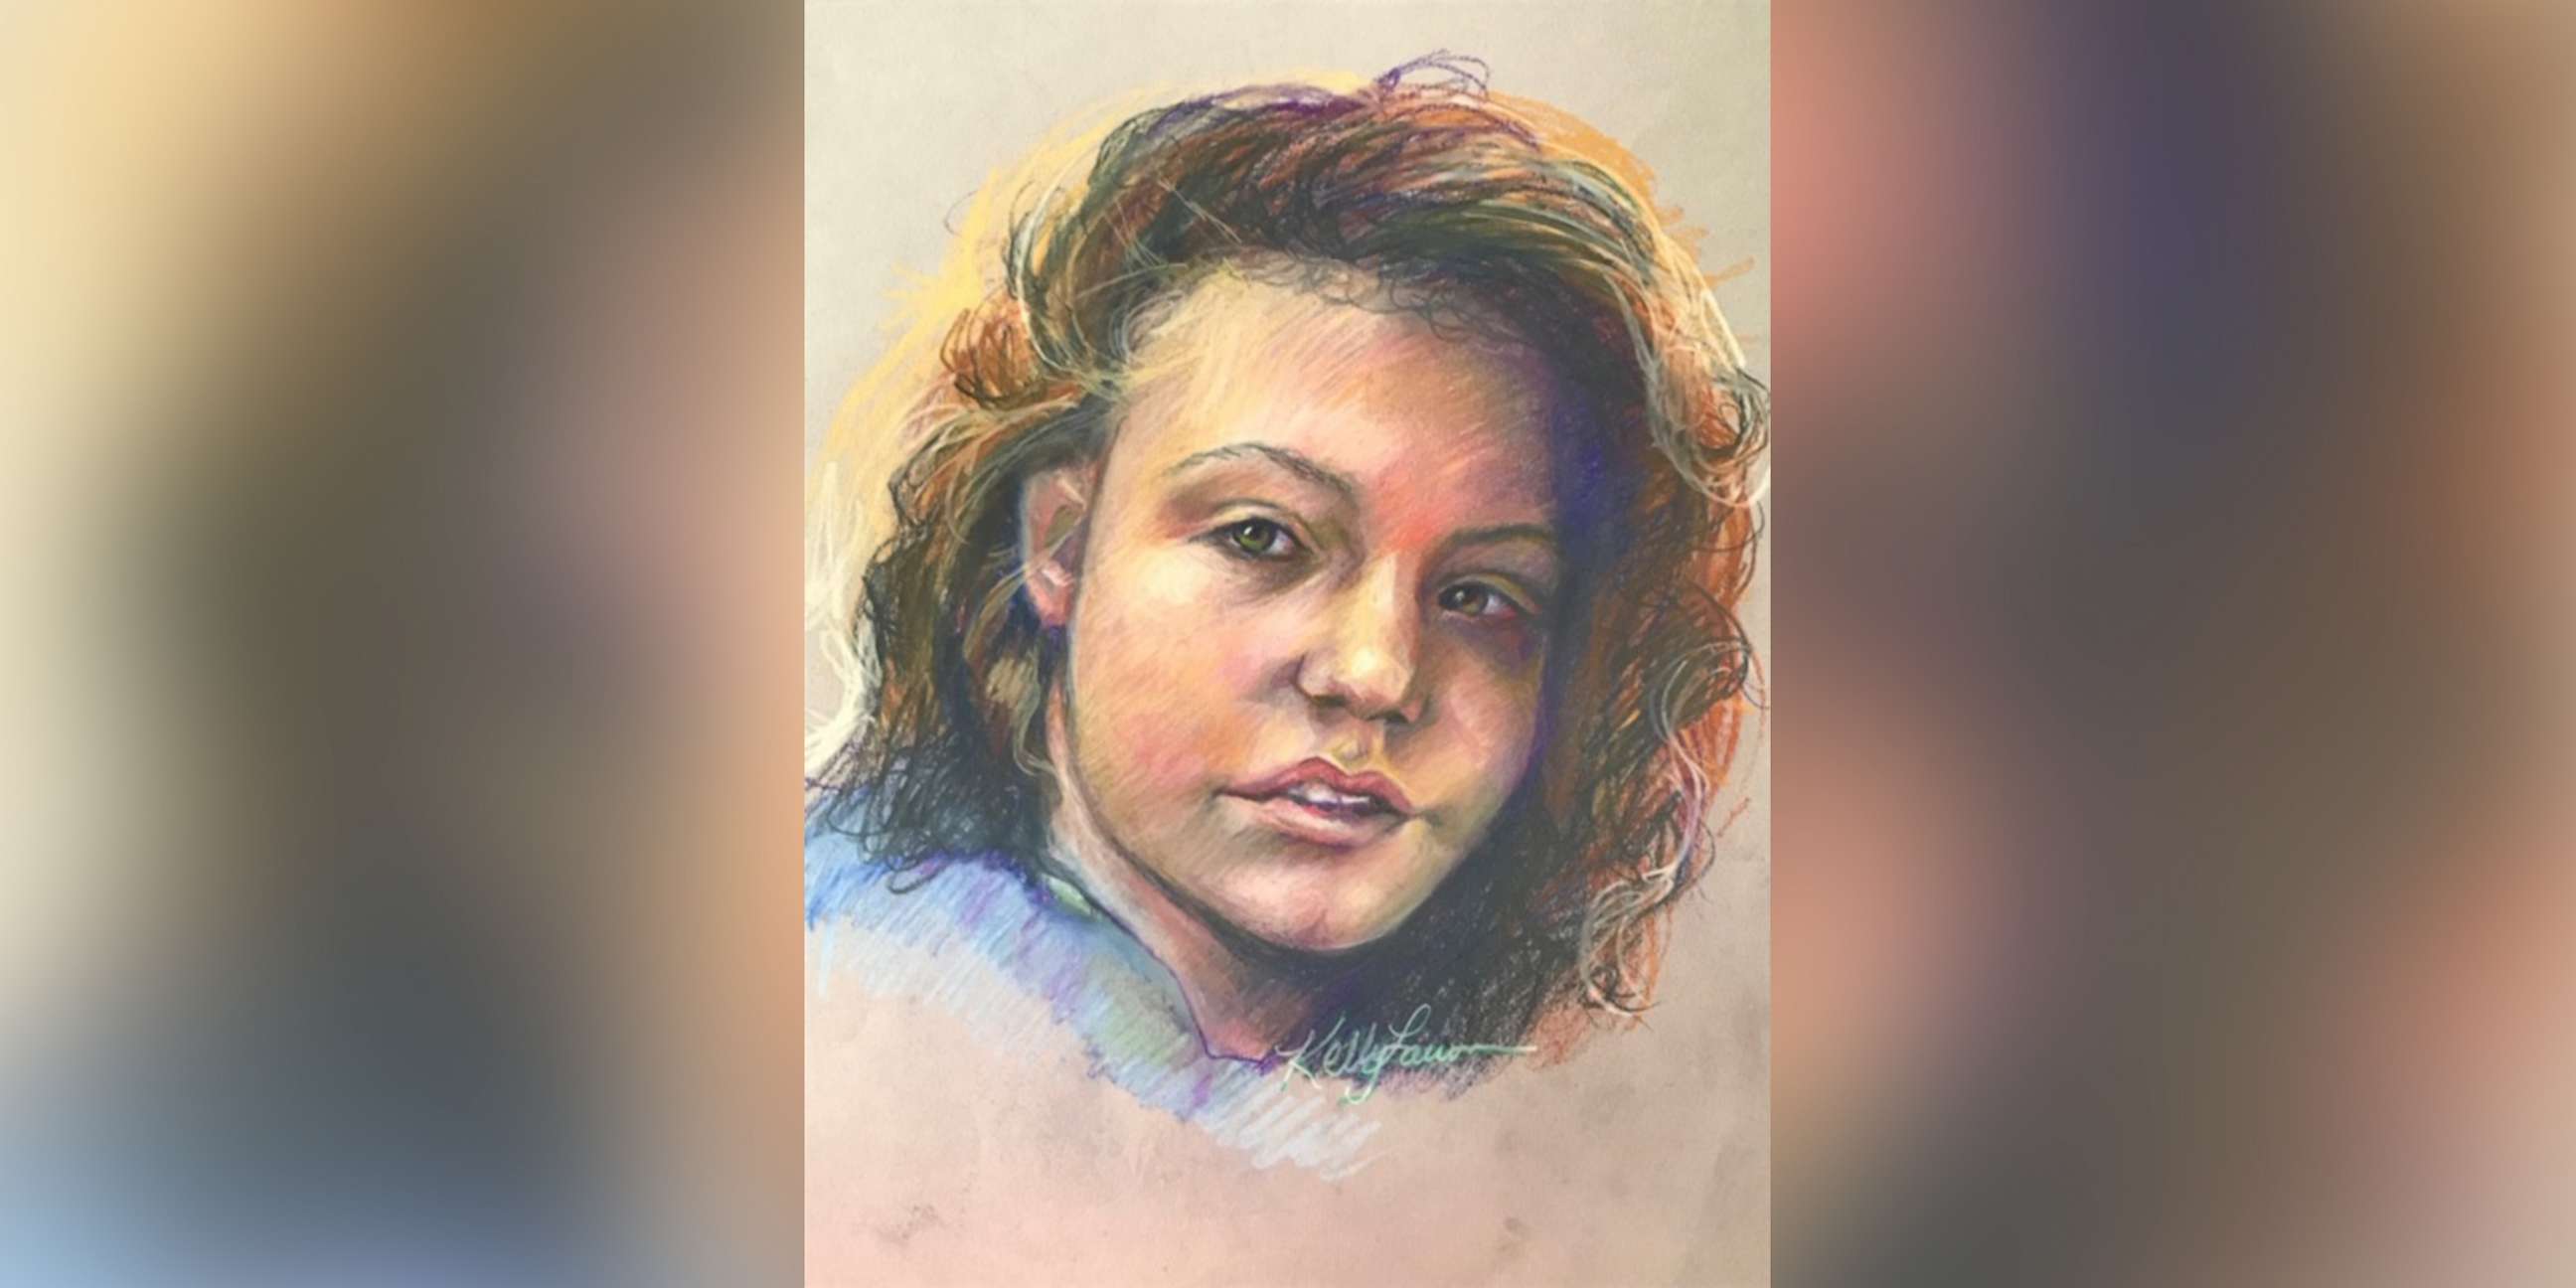 PHOTO: An unidentified female found murdered in Georgia in 1981, depicted in this updated sketch from the Georgia Bureau of Investigation, was identified as Shirlene "Cheryl" Ann Hammack.